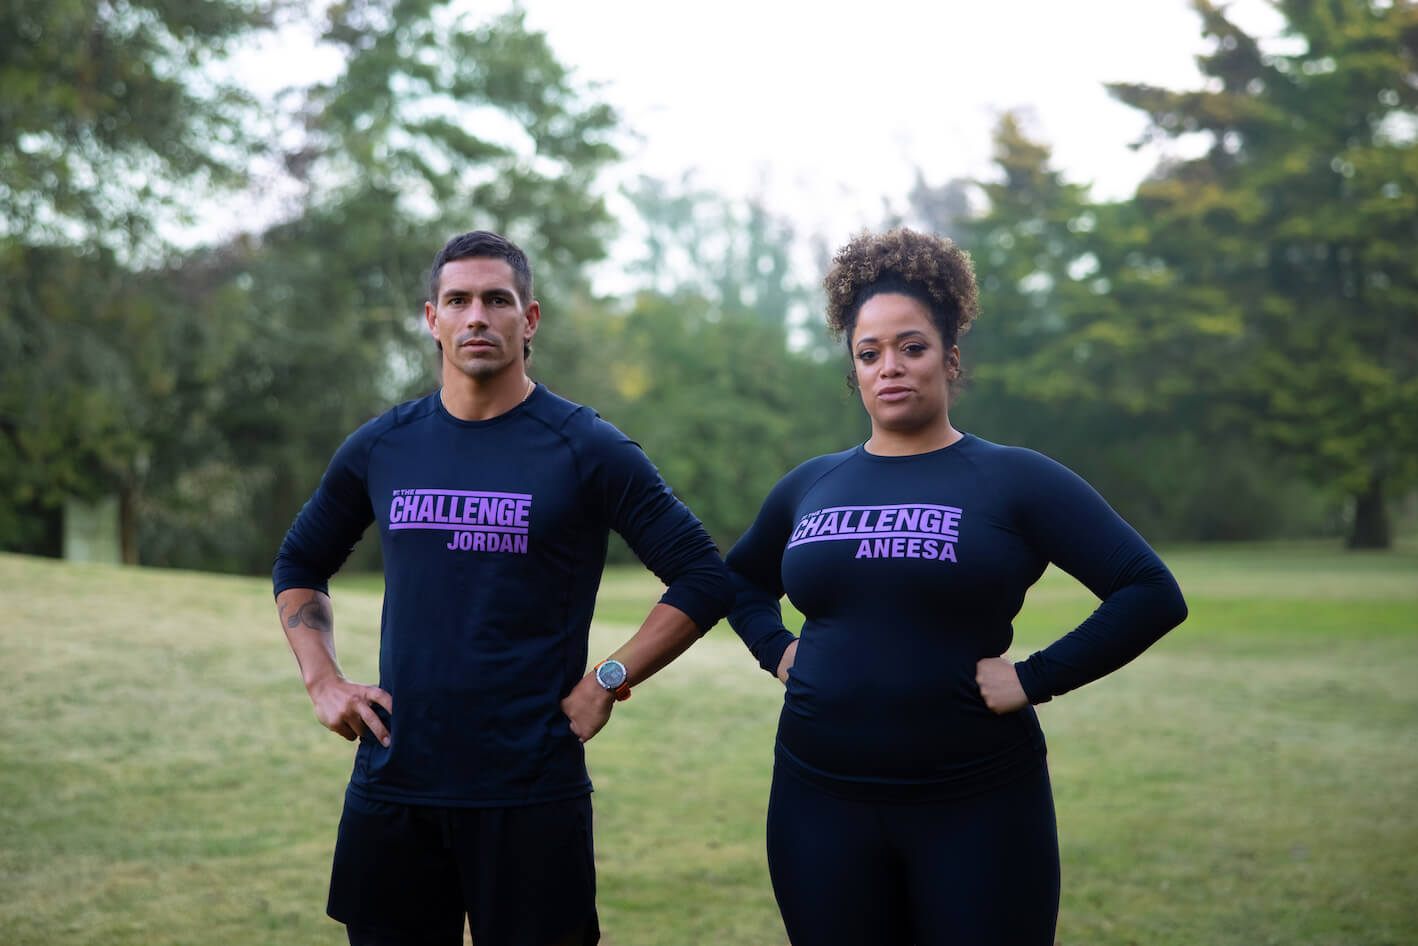 Jordan Wiseley and Aneesa Ferreira from 'The Challenge' Season 38 final standing next to each other outdoors in matching shirts